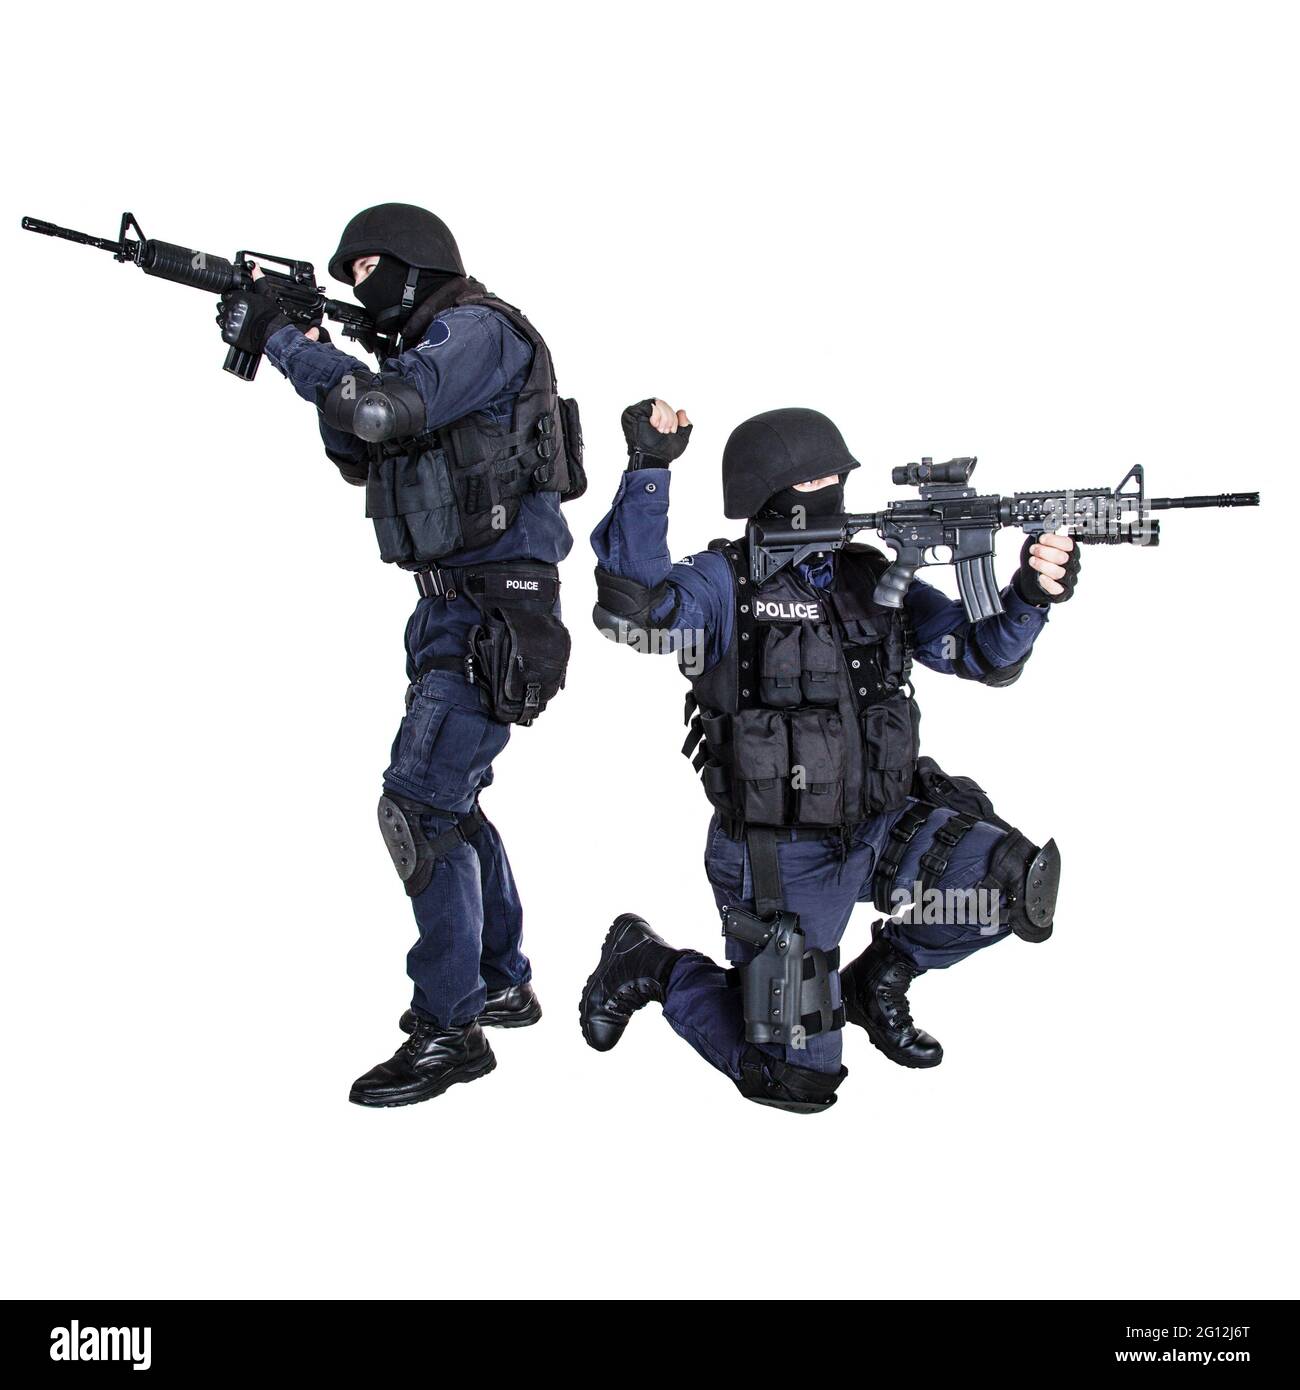 The Evolution of SWAT Team Equipment: From WWII Rifles to BearCats